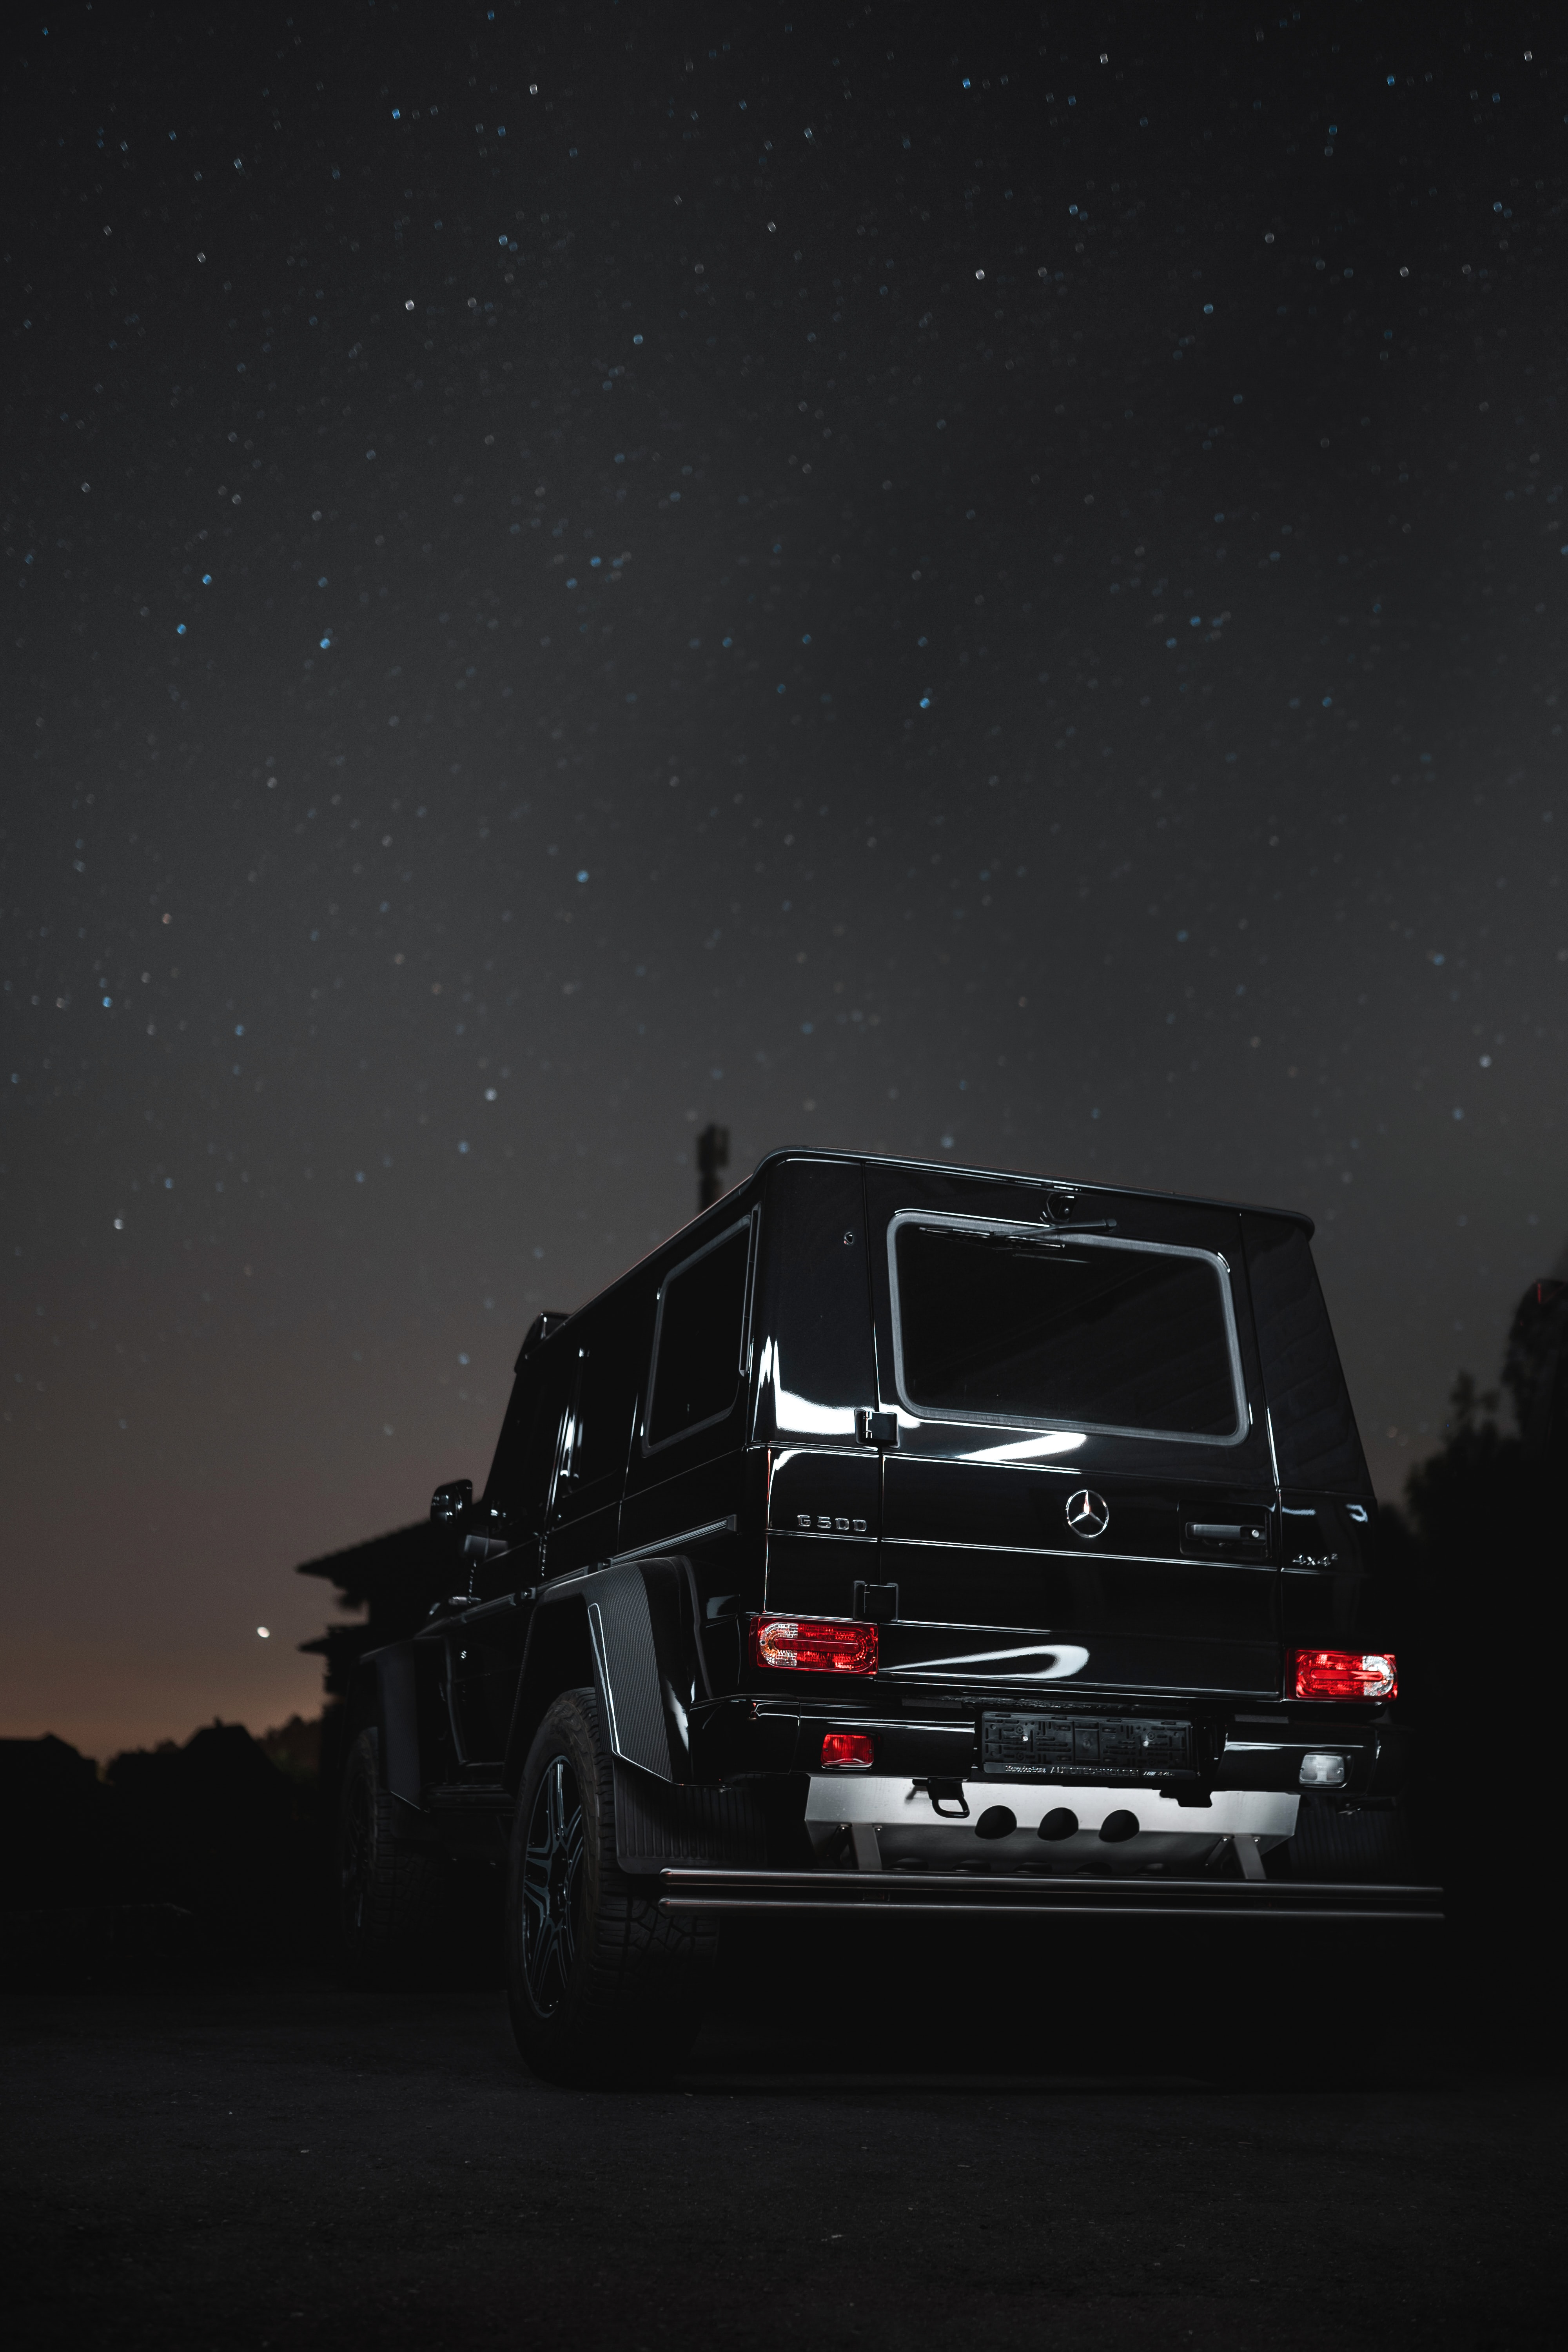 Windows Backgrounds mercedes g500, suv, night, cars, car, jeep, mercedes